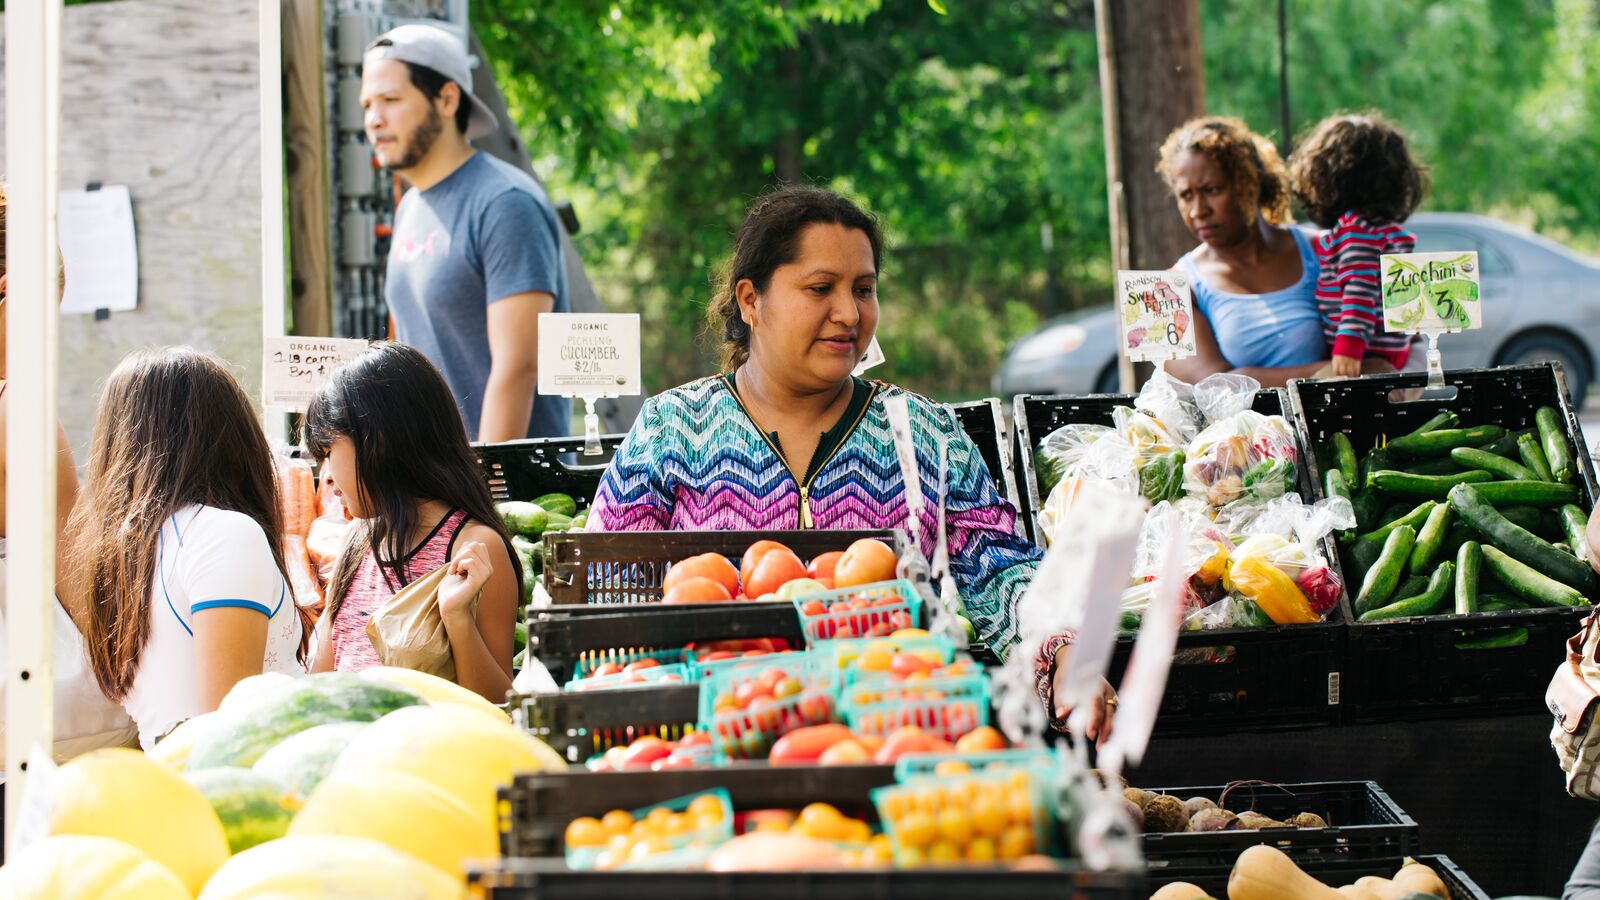 A woman at a farmer's market looks at affordable fruit and vegetables next to families